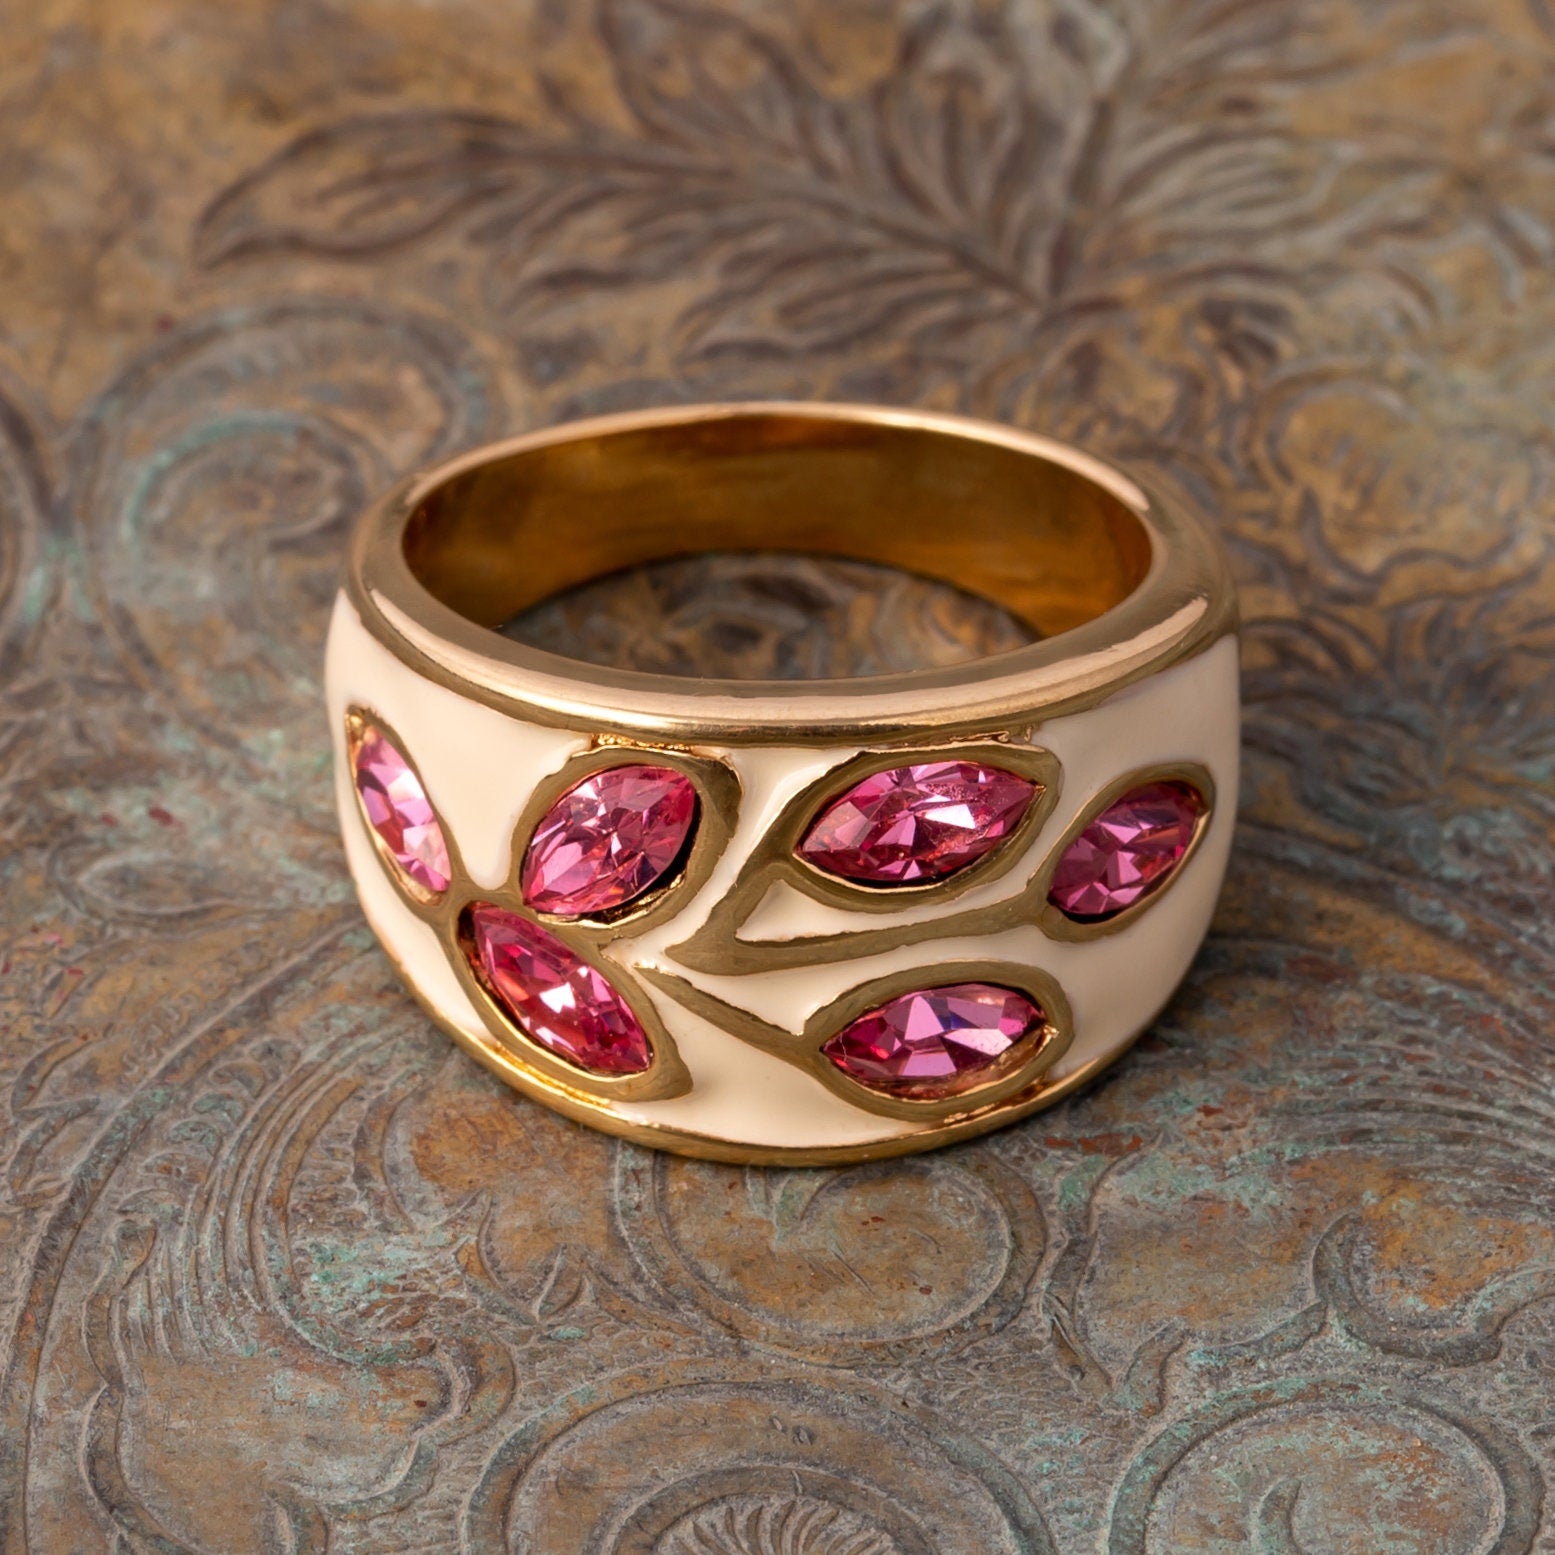 Vintage Ring 1980s White Enamel Ring with Pink Crystal Leaf Motif 18k Gold Plated Antique Womans Jewelry #R3043 - Limited Stock - Never Worn